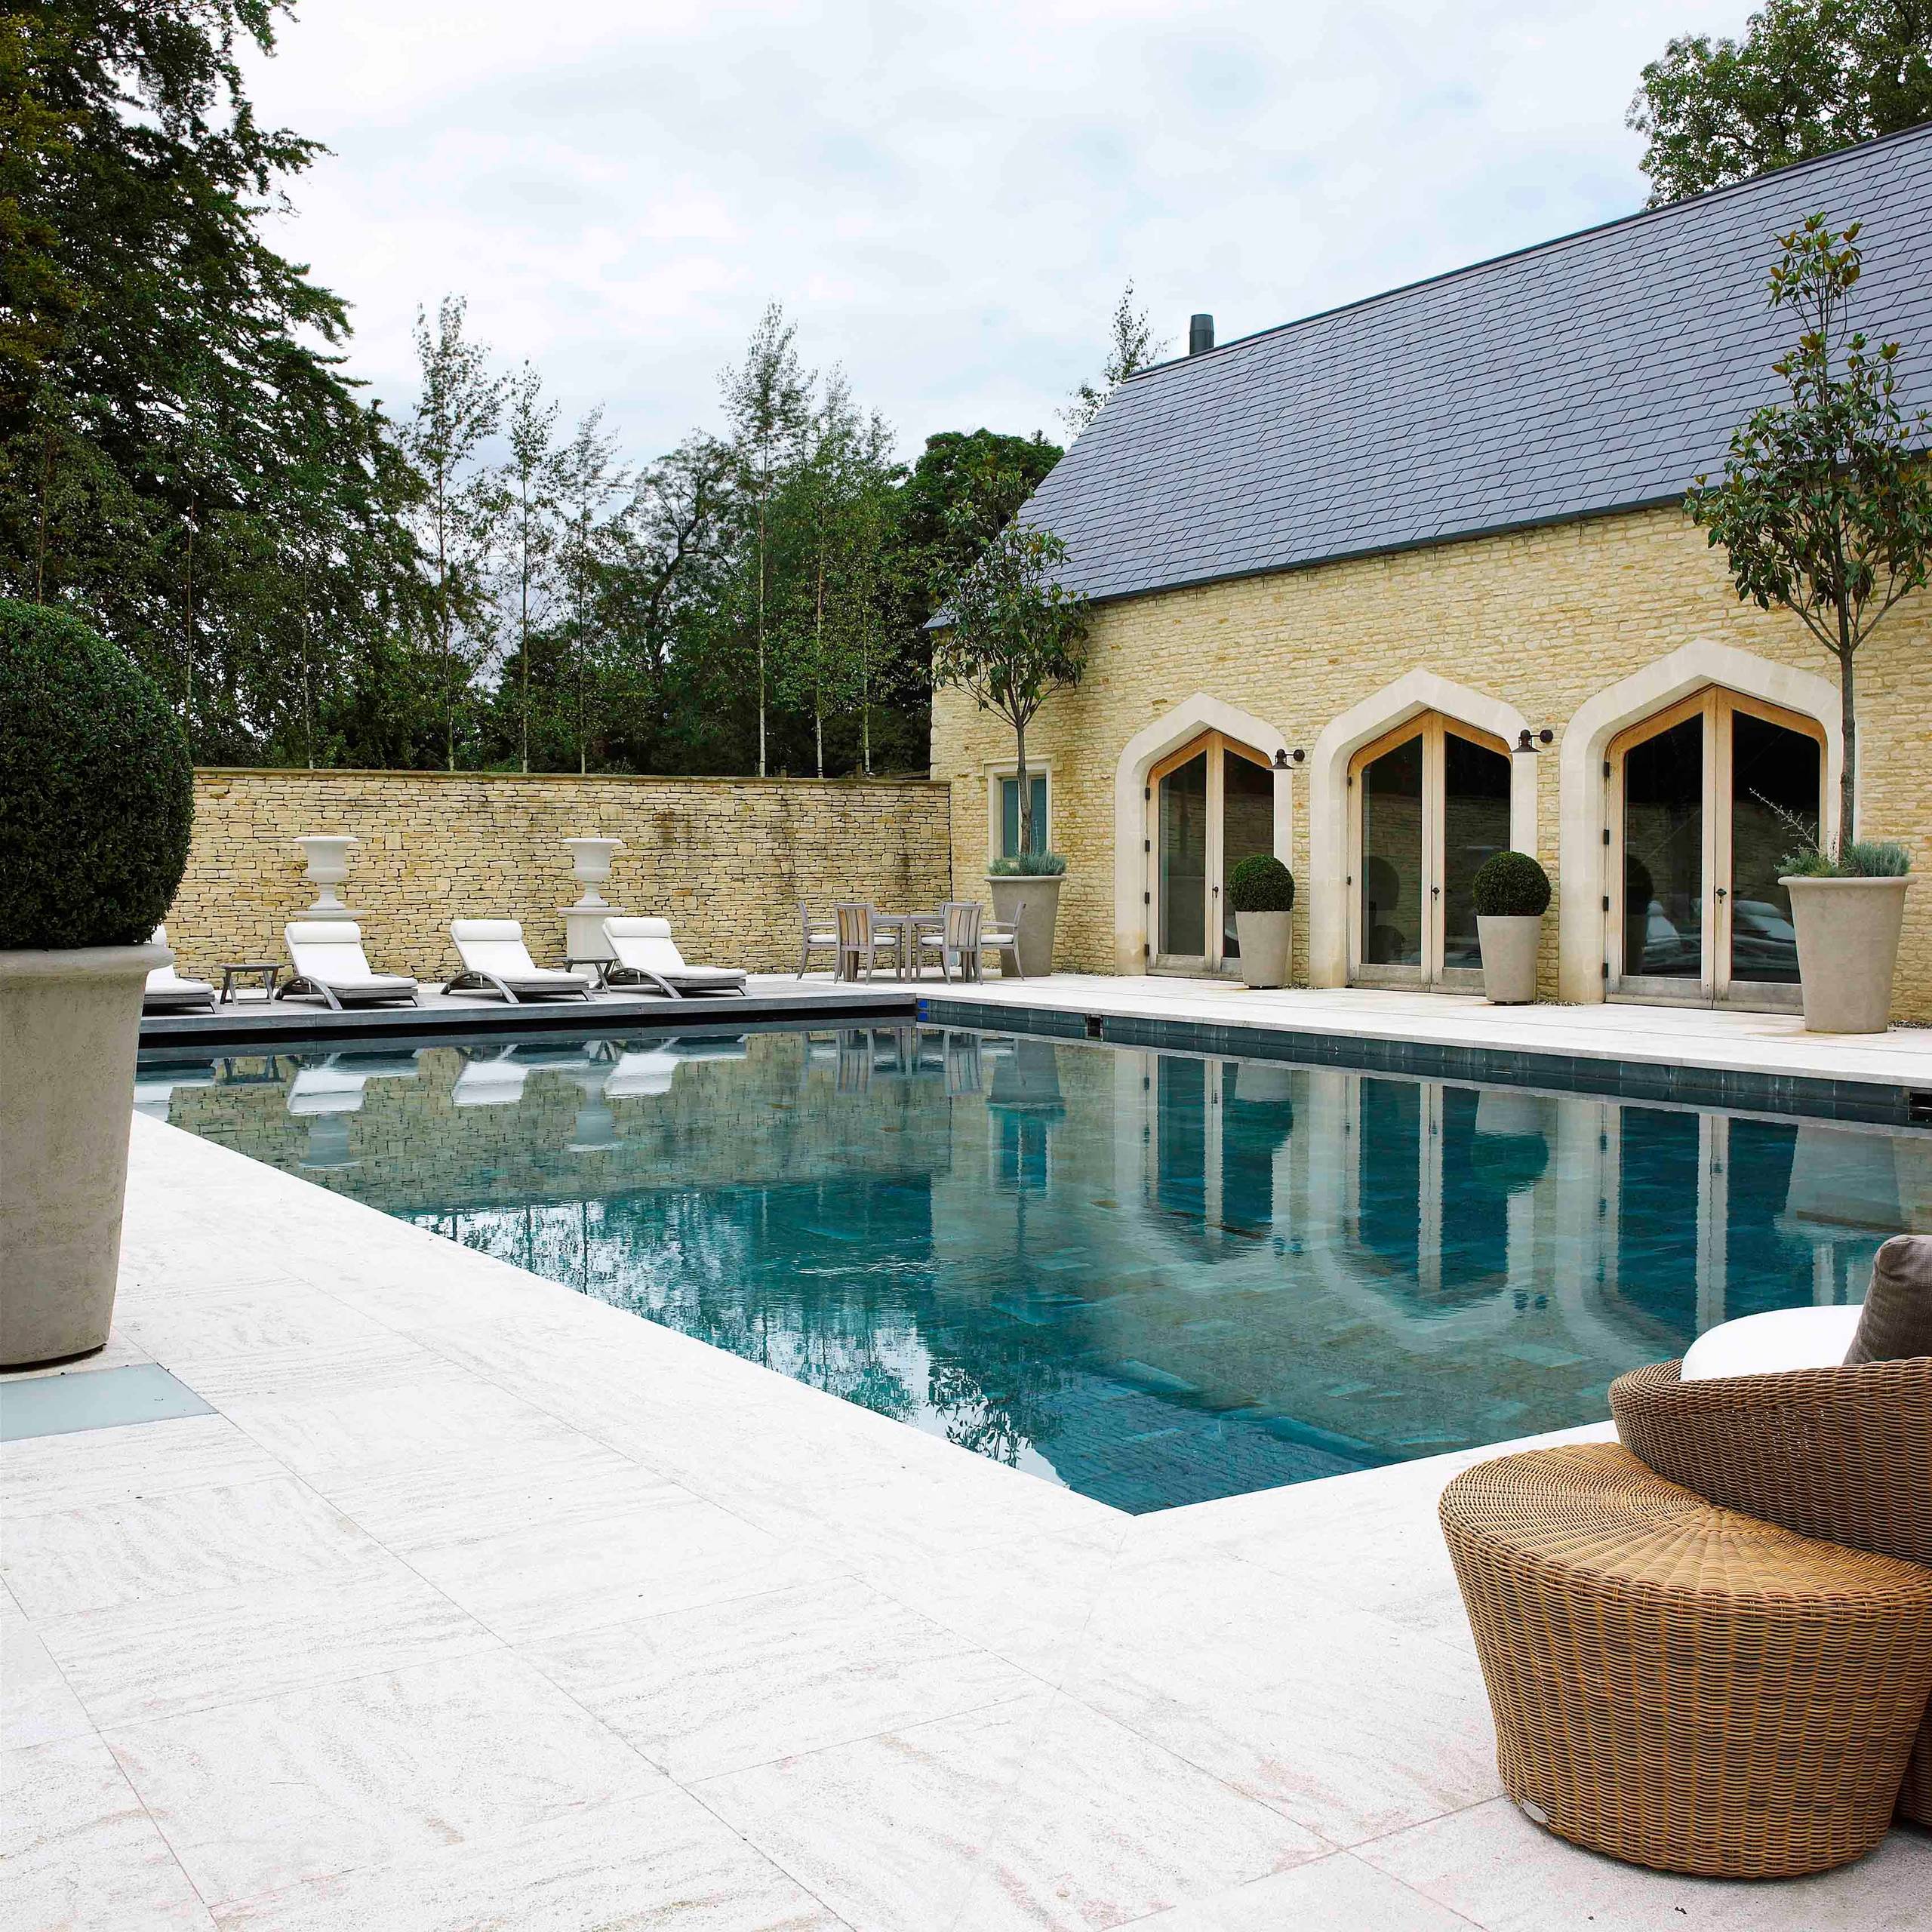 Private Wellness Spa, Cotswolds - Modern - Pool - West Midlands - by John  Evans Interior Architecture & Design Ltd | Houzz